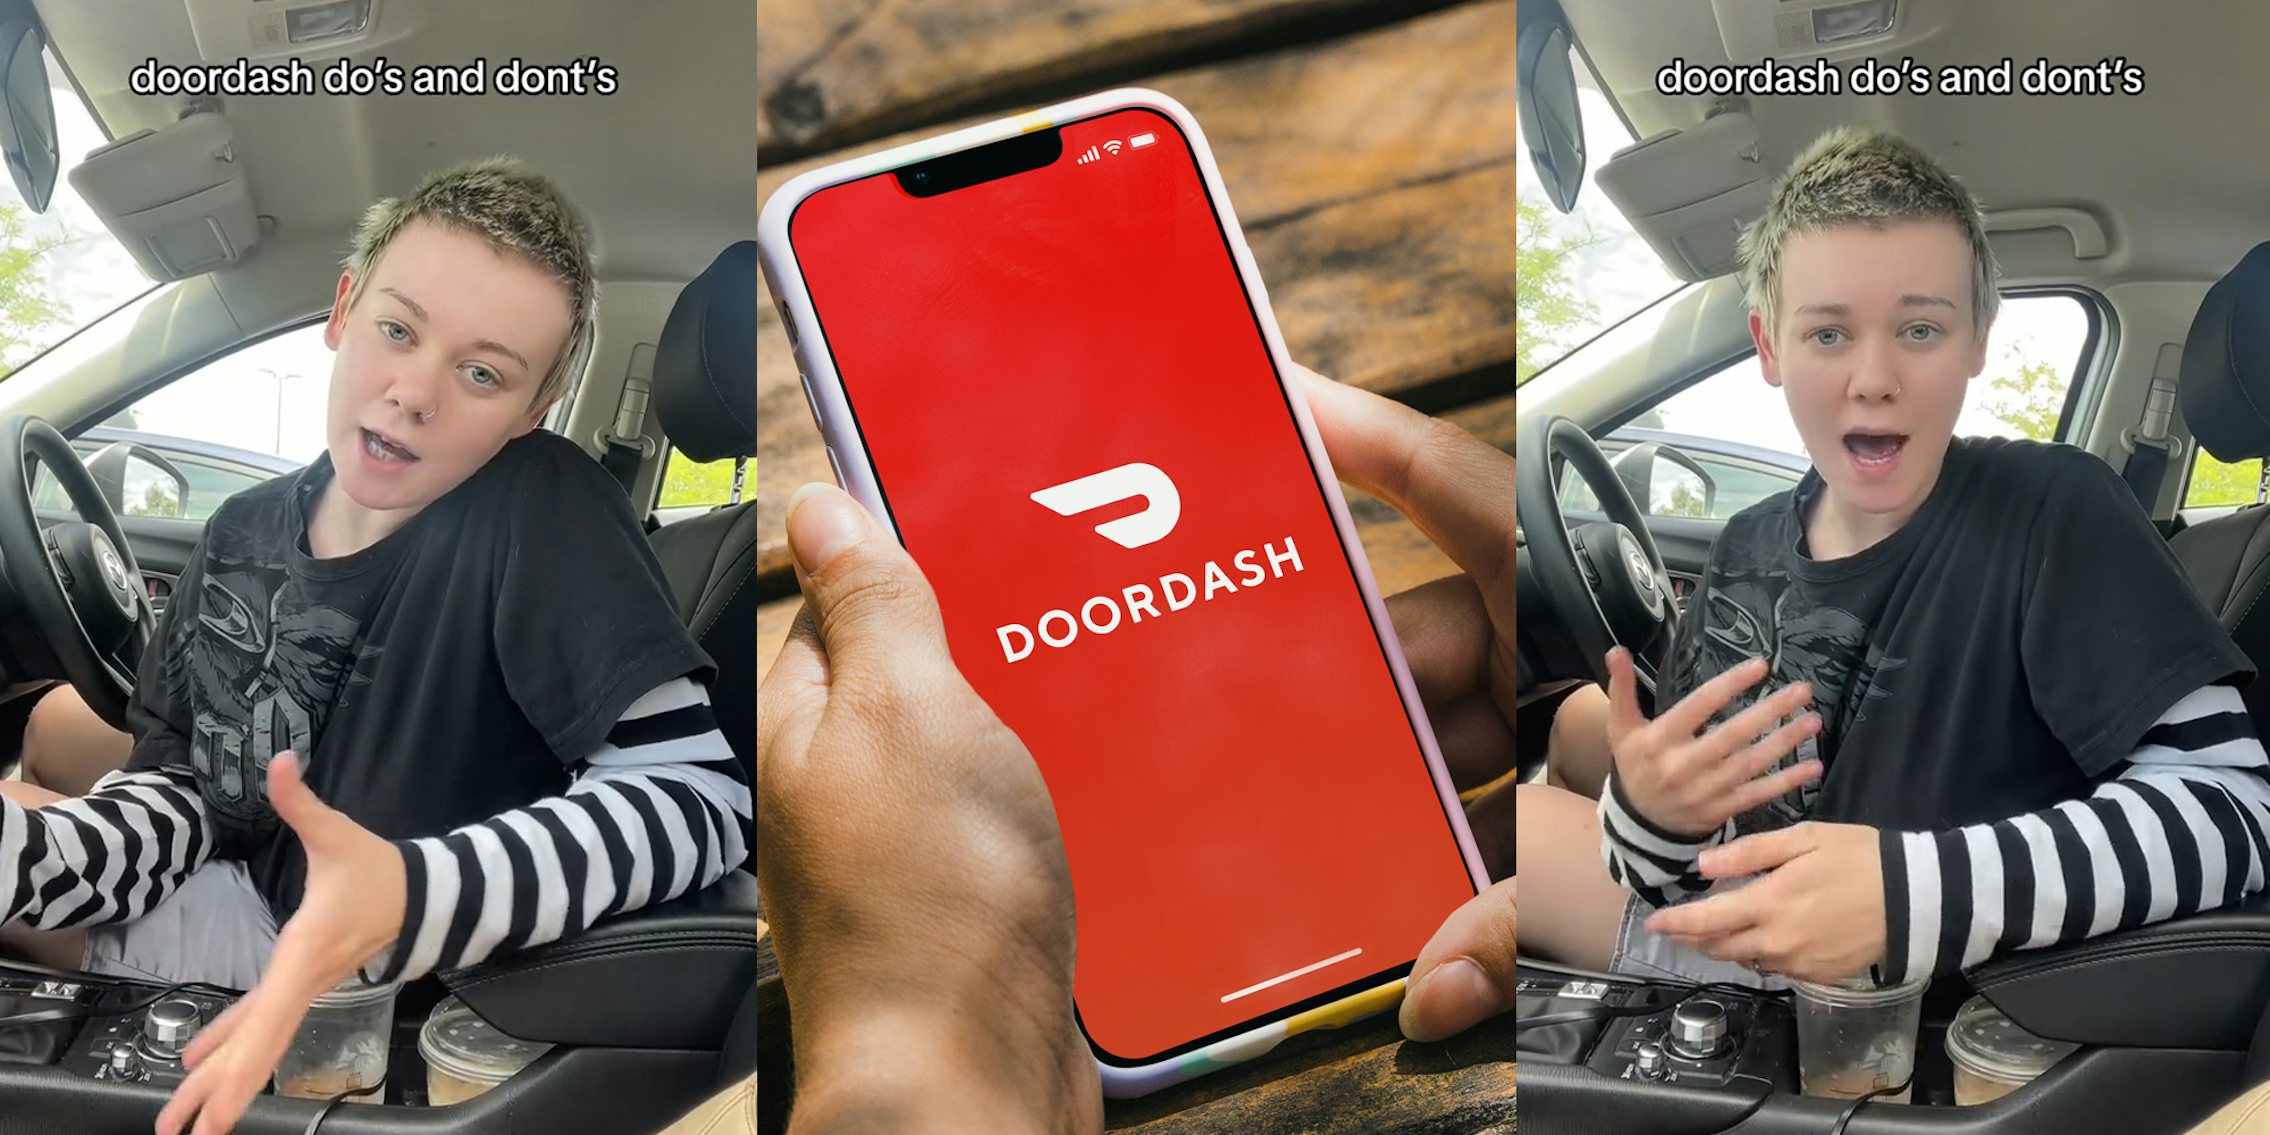 DoorDash Banned Discussing Work Issues, Illegally Fired Activist, NLRB  Alleges - Bloomberg